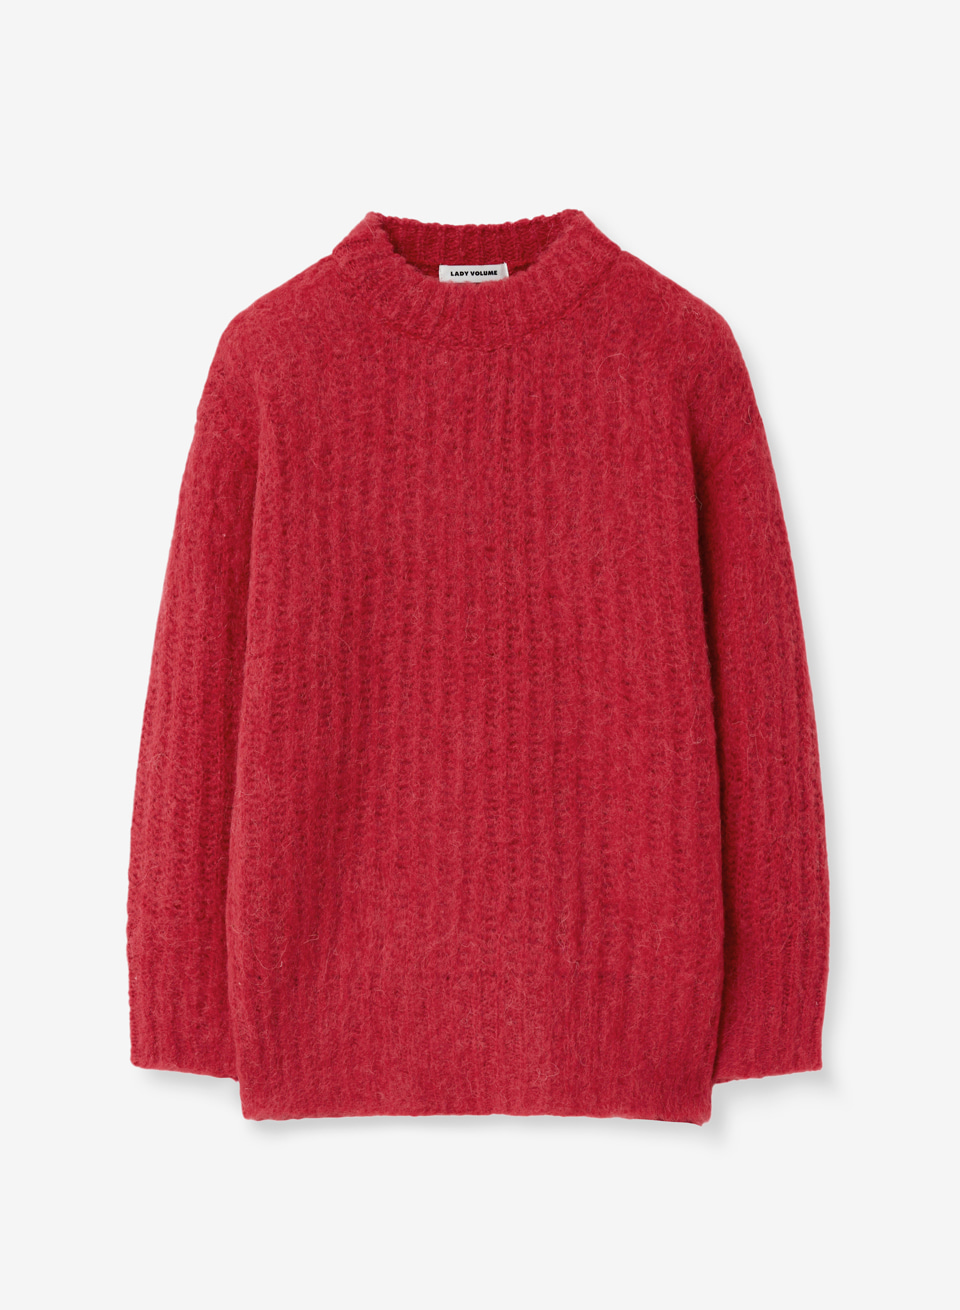 CASHMERE BRUSH KNIT_RED